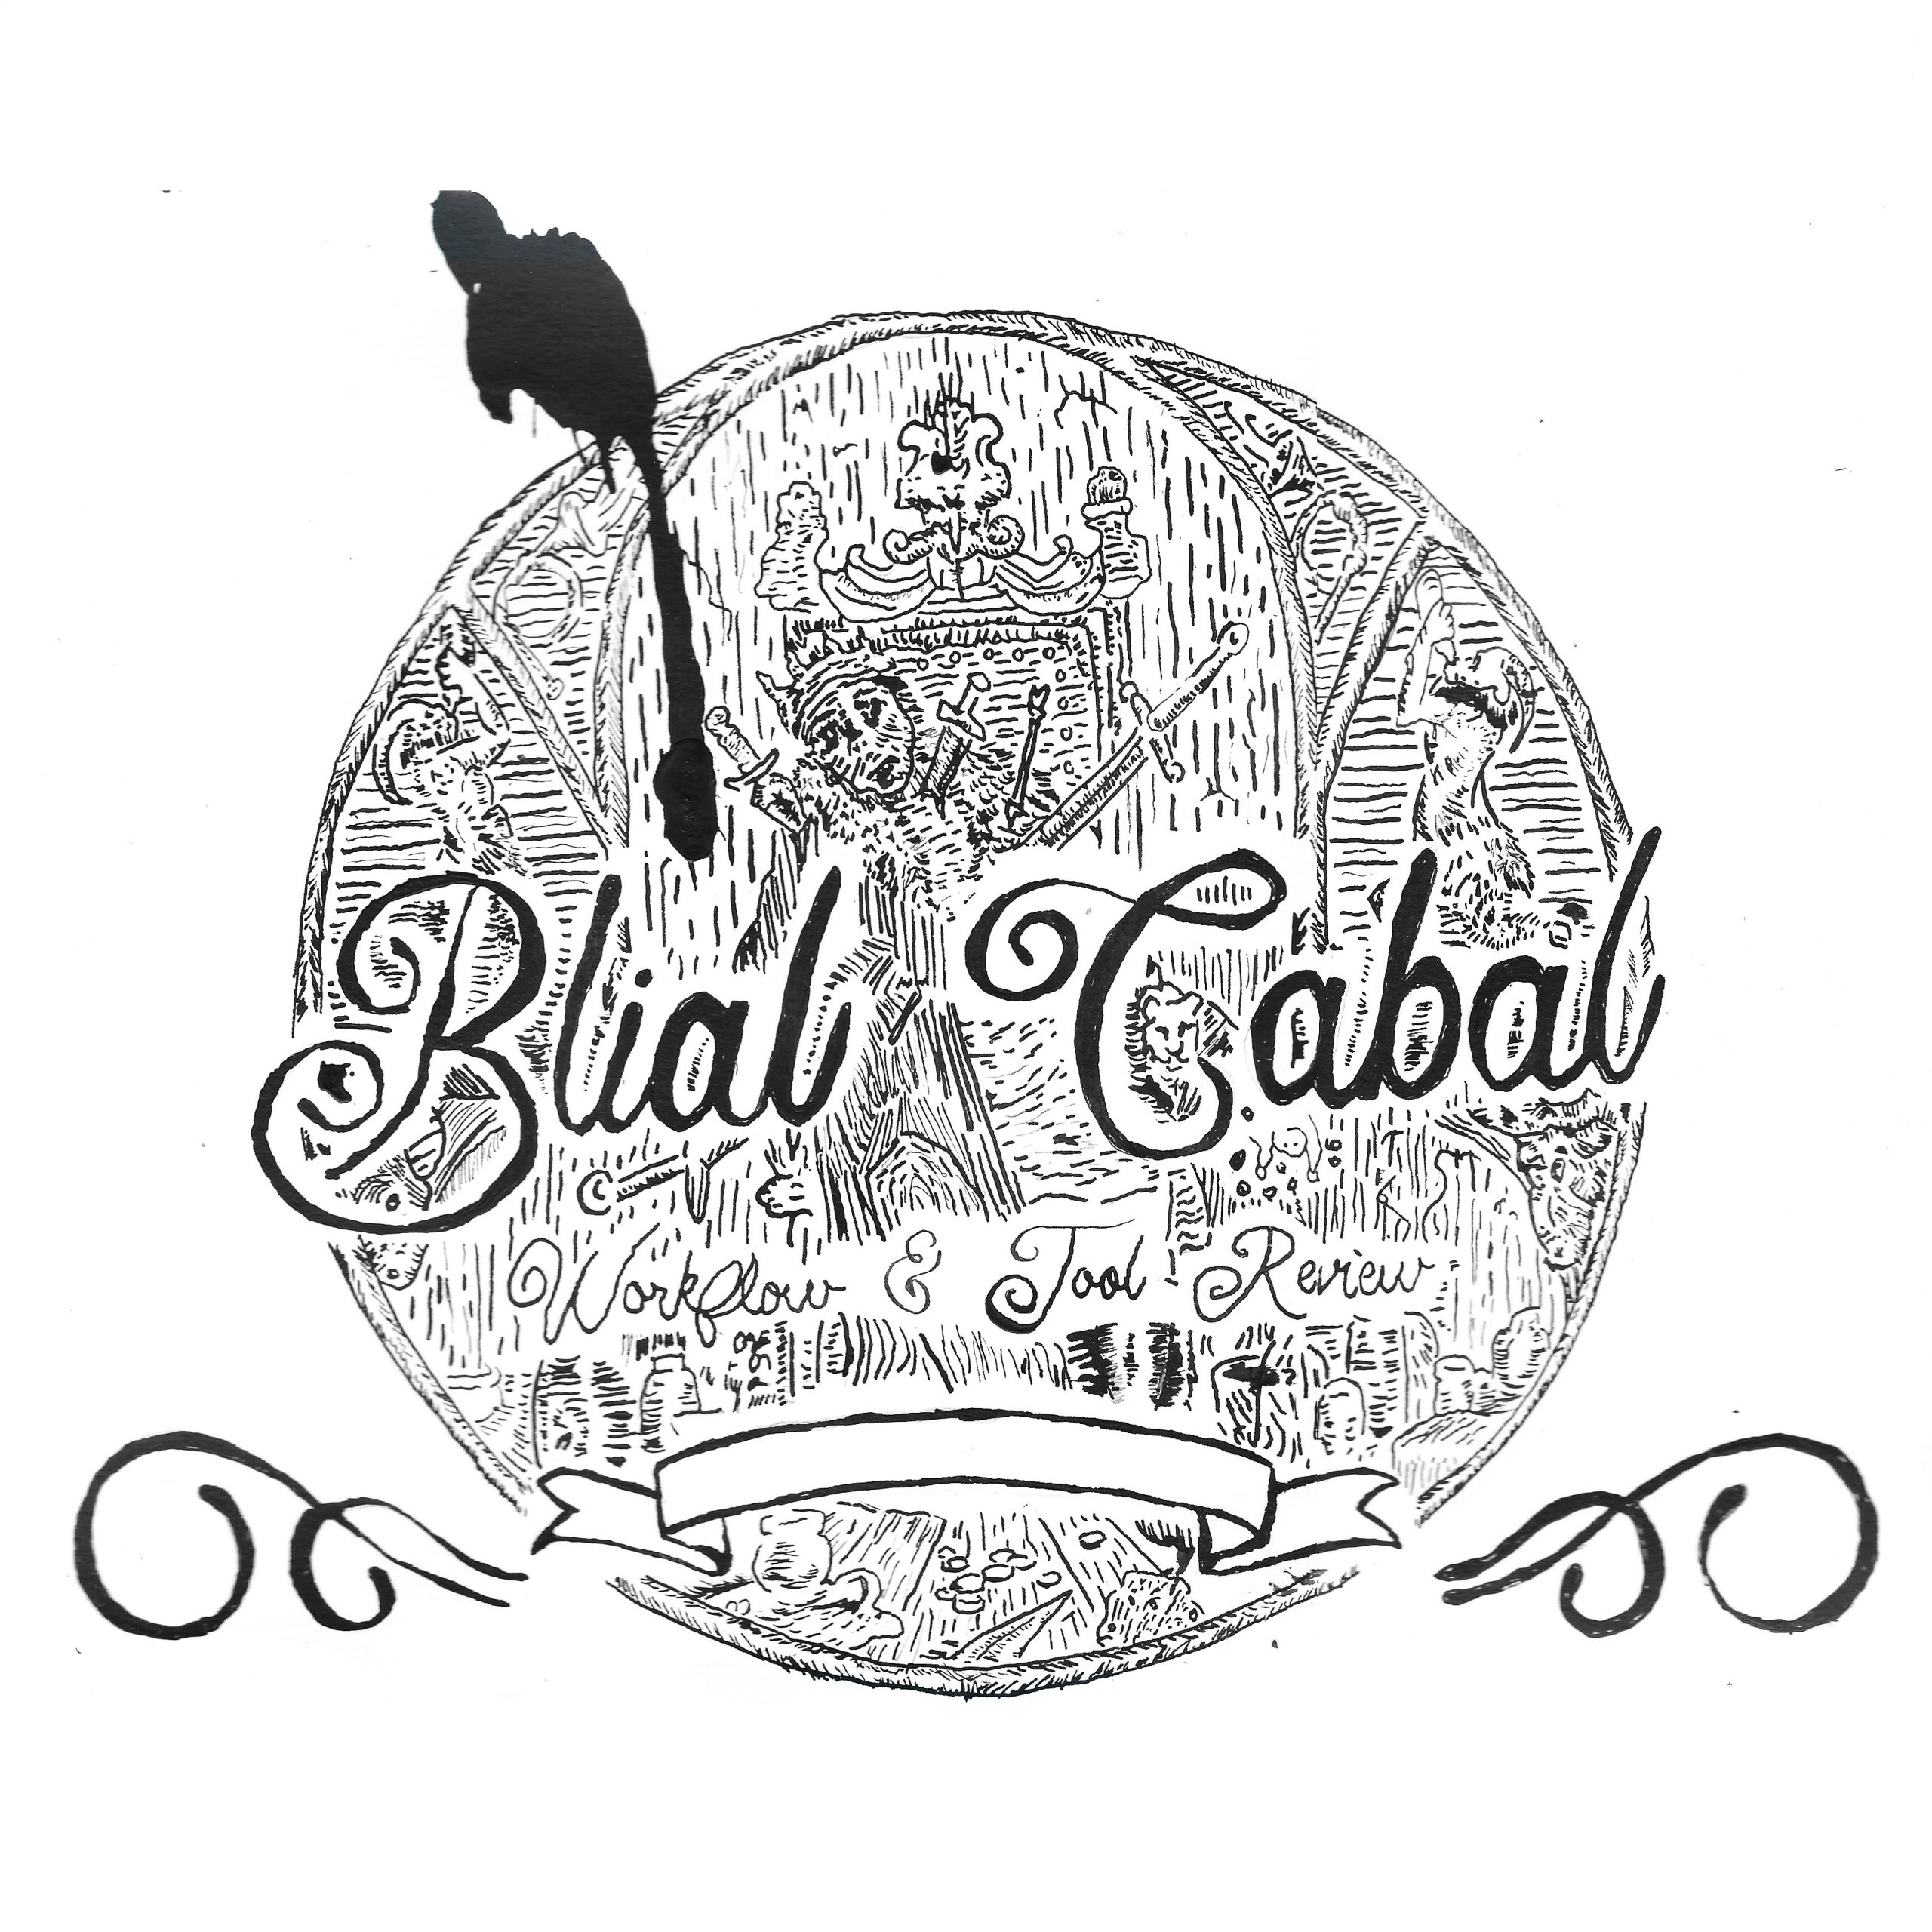 Blial Cabal’s Tools Review – Pen Review